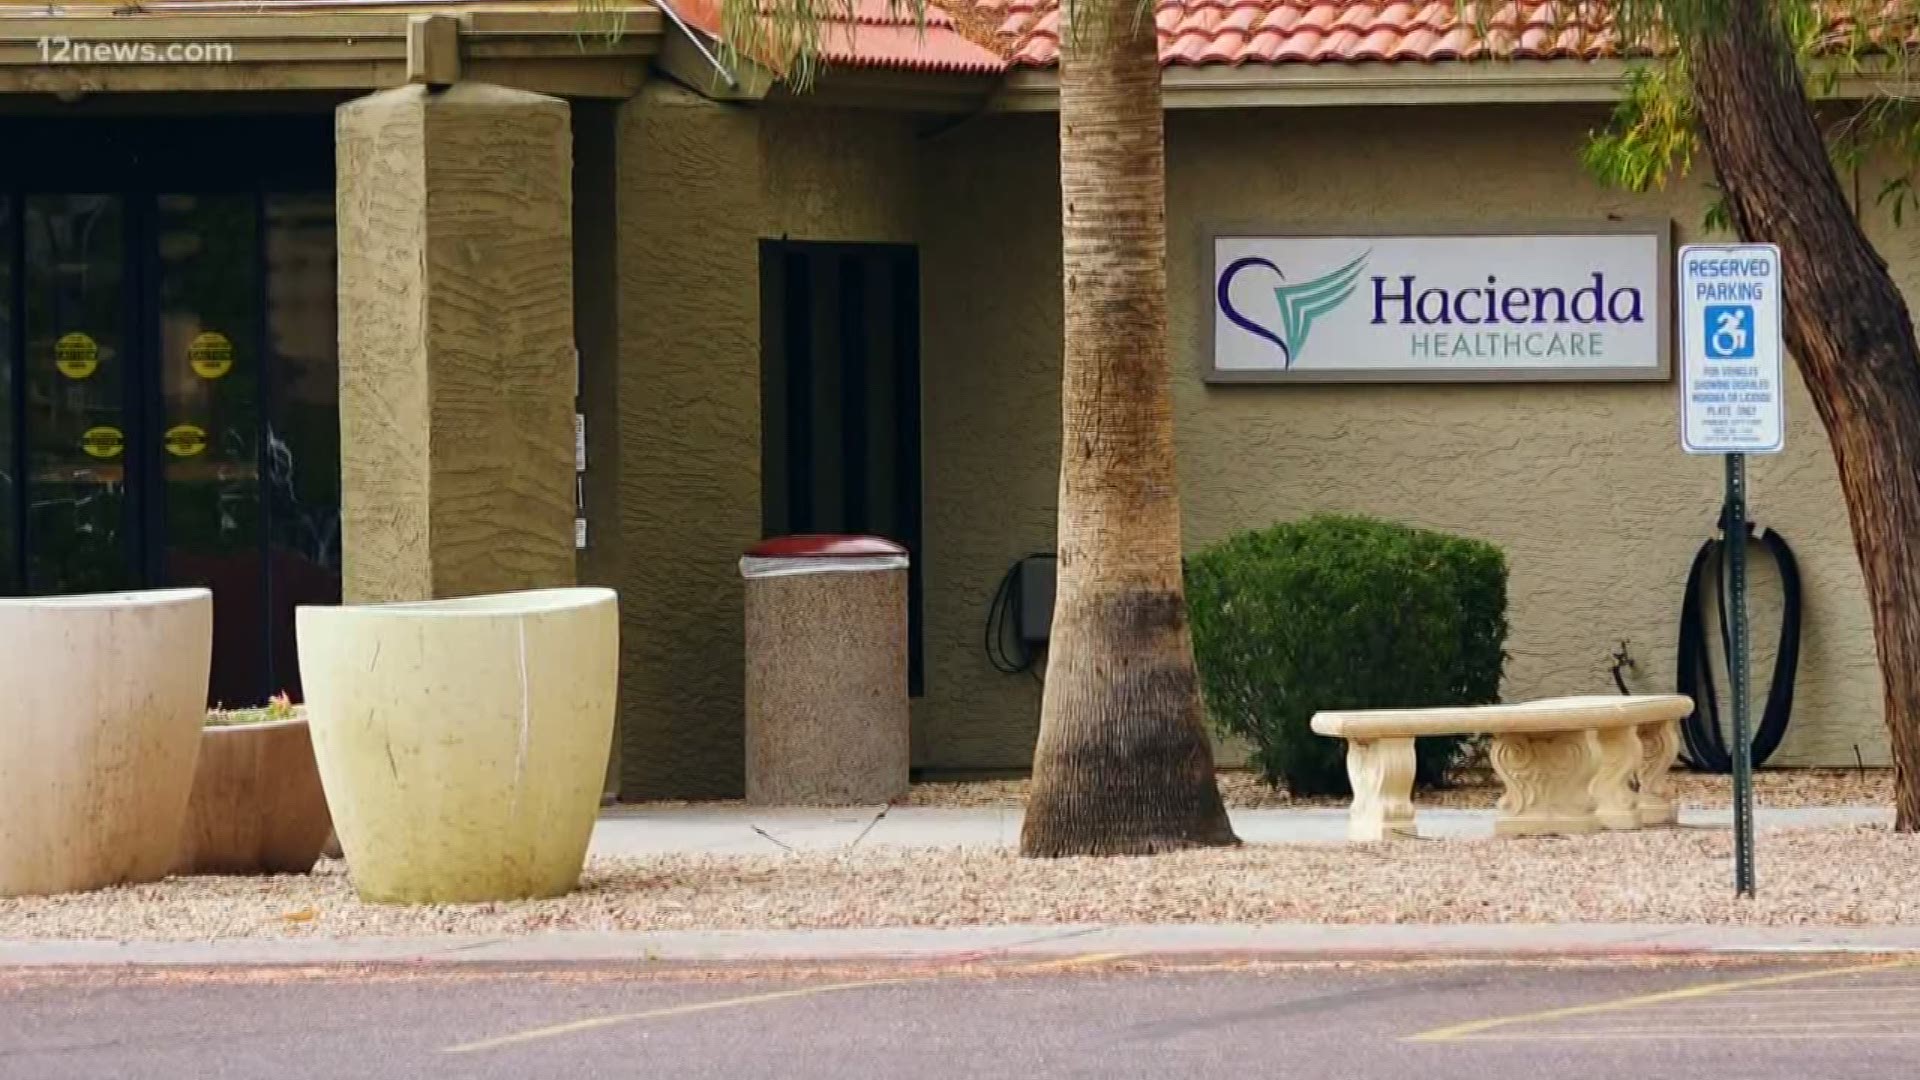 For the first time since a woman was raped and gave birth at Hacienda Healthcare, we are bringing you inside the facility. Families on the inside, with loved ones receiving care, are pushing back and fighting for Hacienda to stay open.